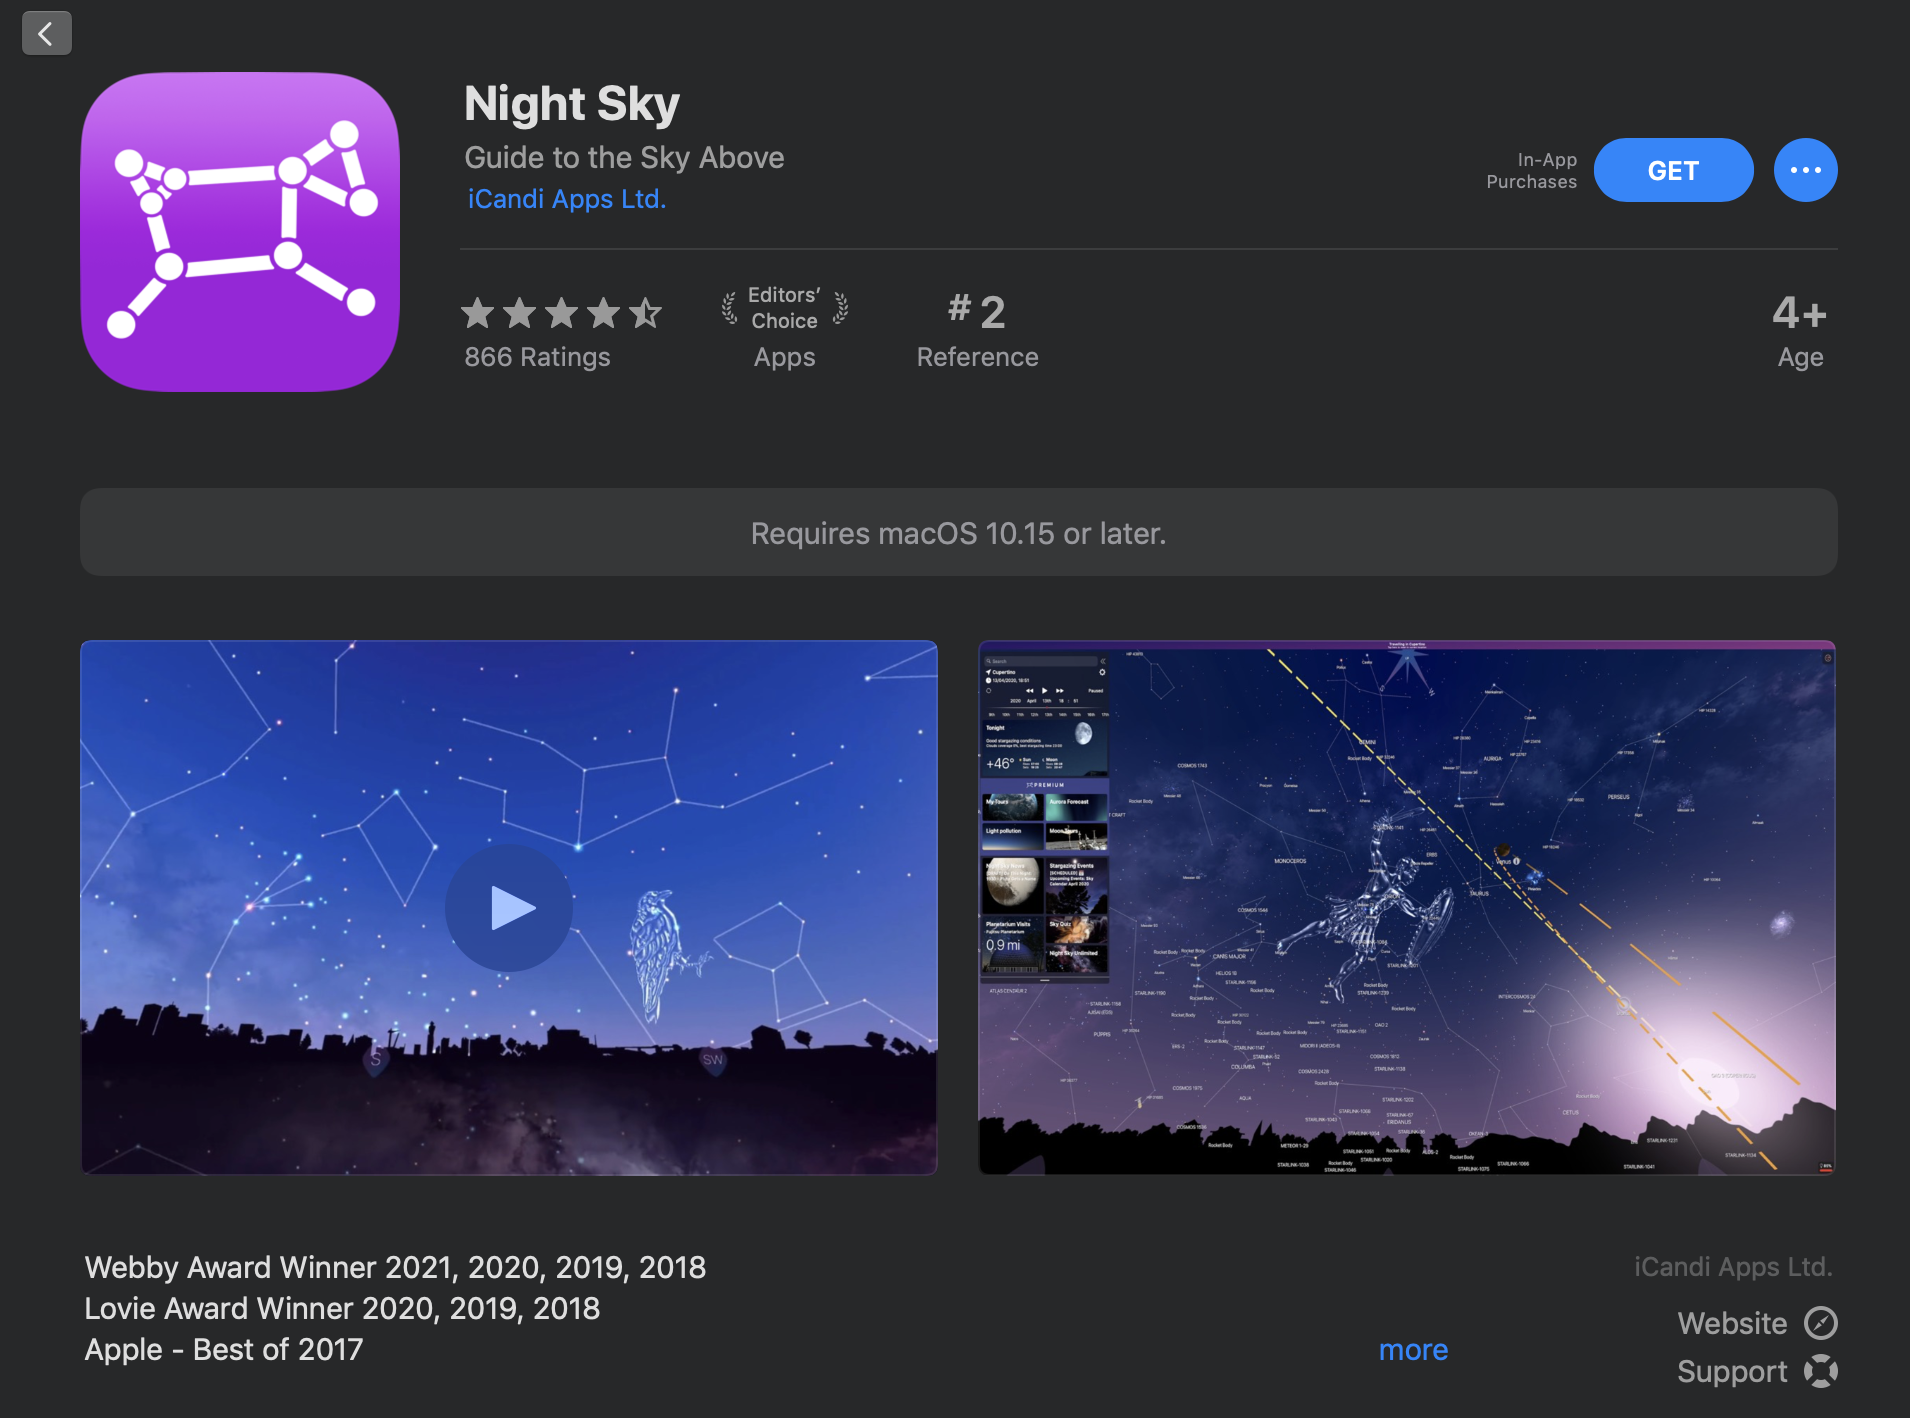 Popular app Night Sky cements its good reputation by listing its Lovie win right in the App Store.